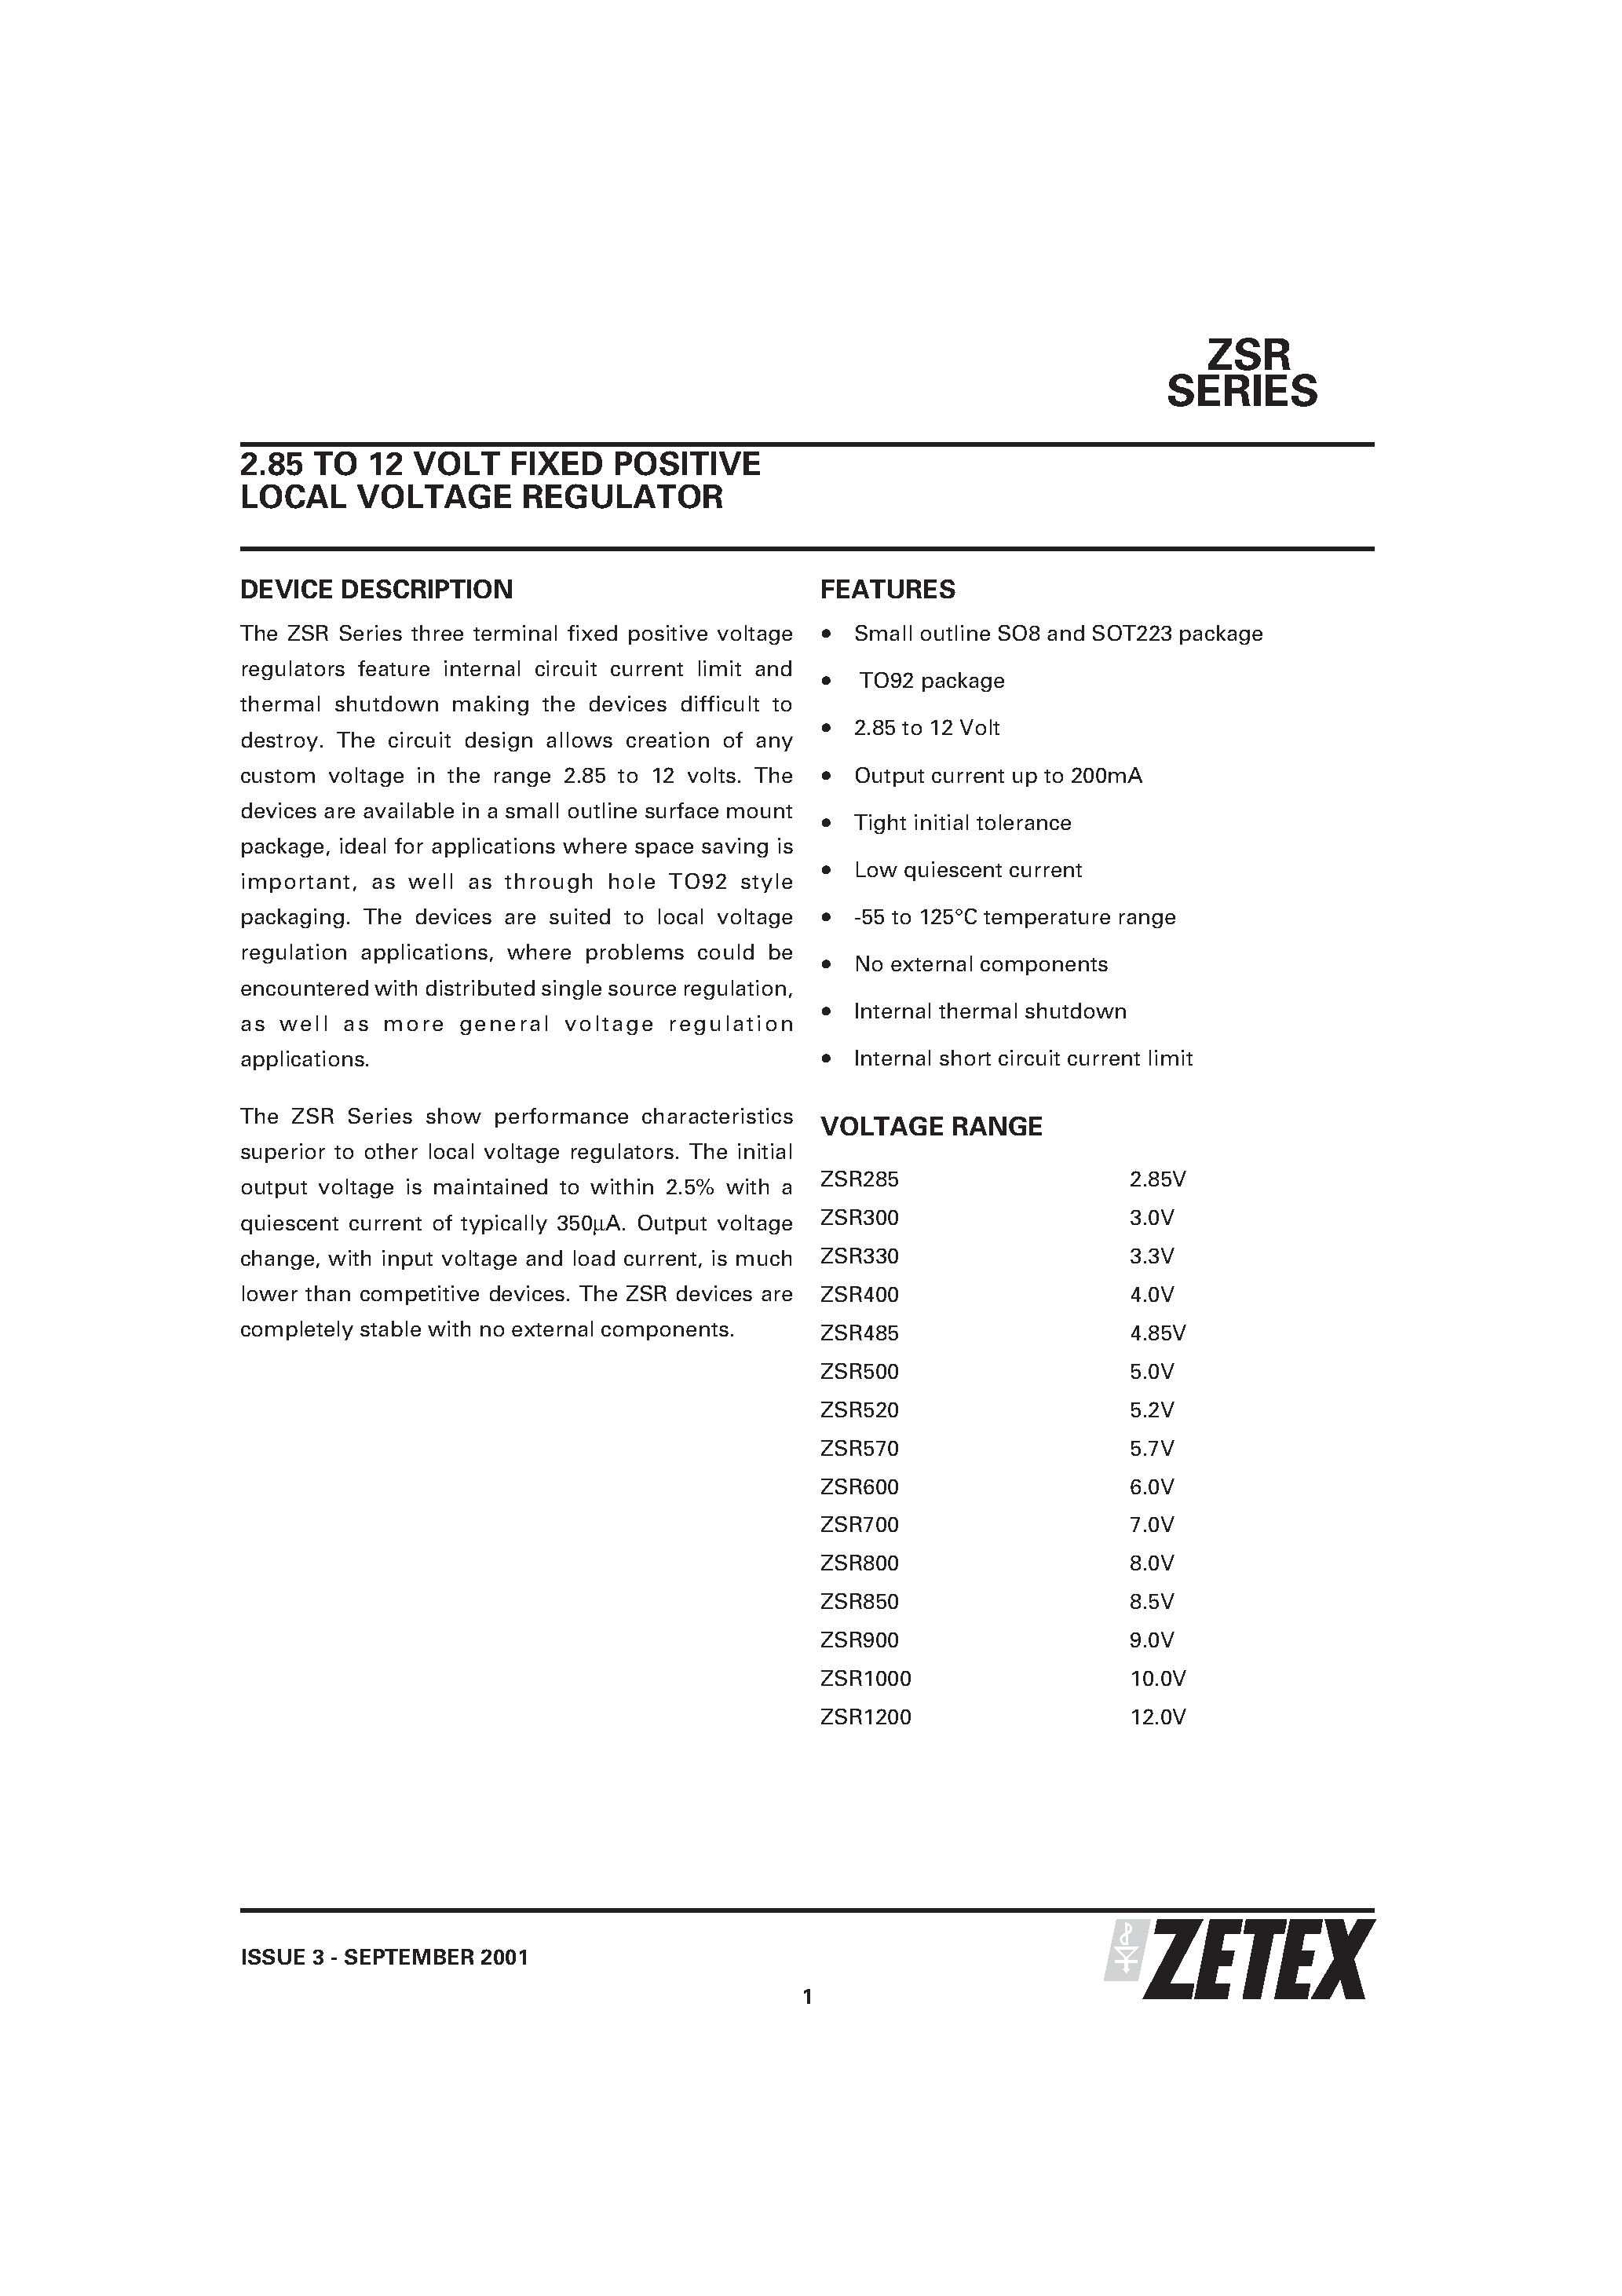 Datasheet ZSR520C - 2.85 TO 12 VOLT FIXED POSITIVE LOCAL VOLTAGE REGULATOR page 1